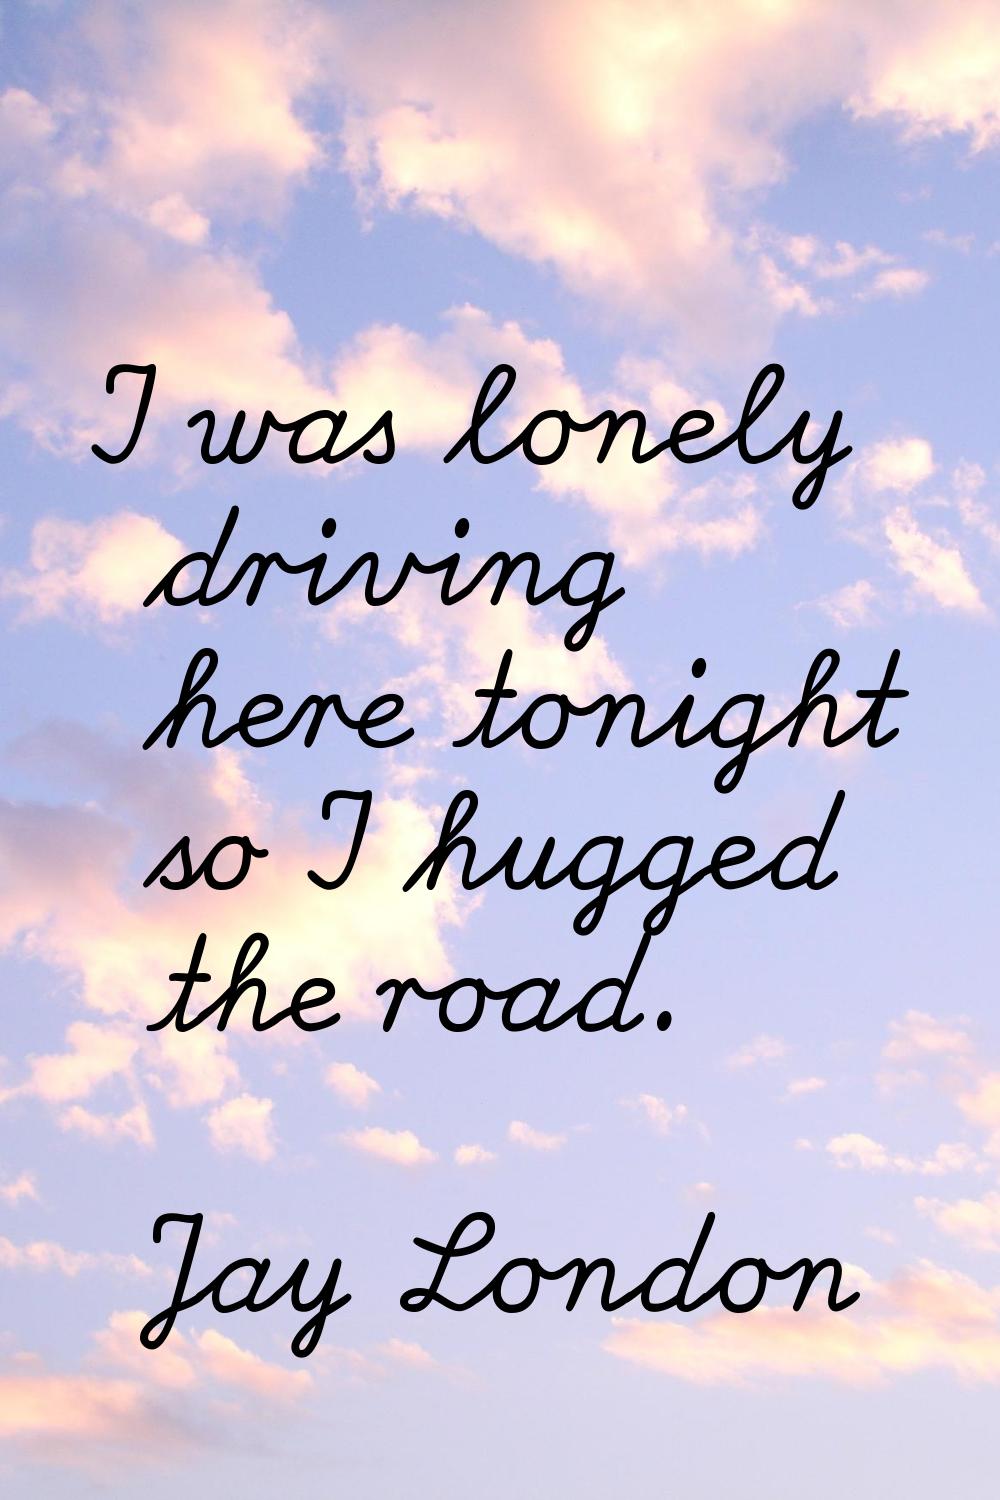 I was lonely driving here tonight so I hugged the road.